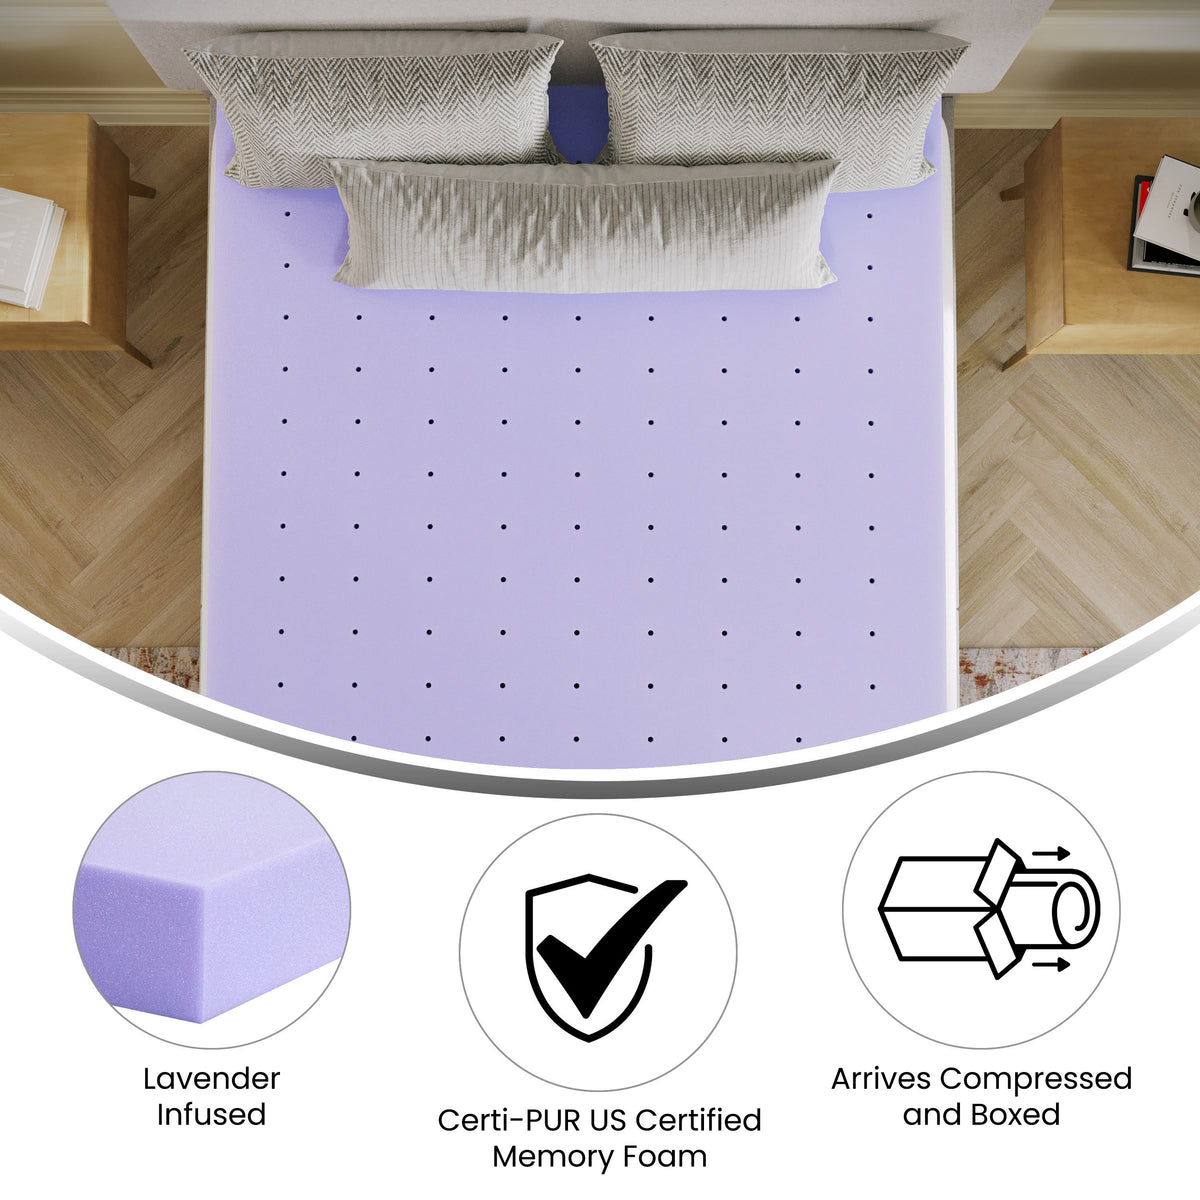 Full |#| 3" Lavender Infused Memory Foam Mattress Topper with Ventilated Design - Full